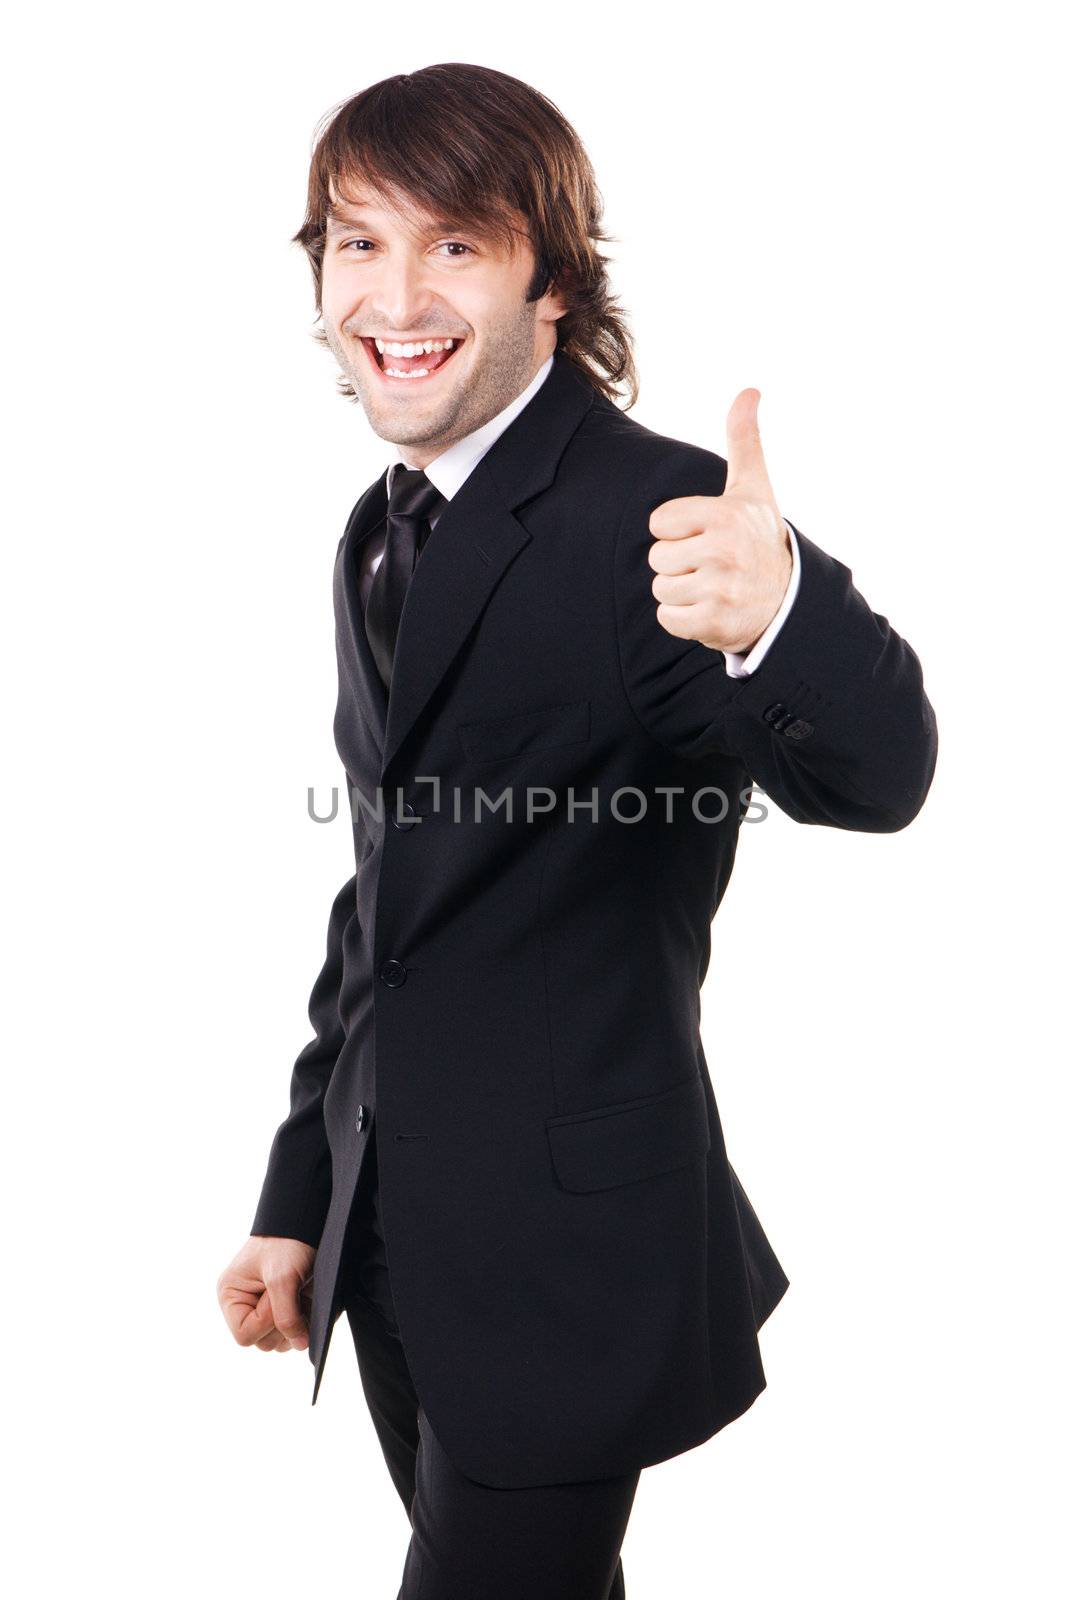 Cheerful businessman showing "Thumbs up" sign, white background